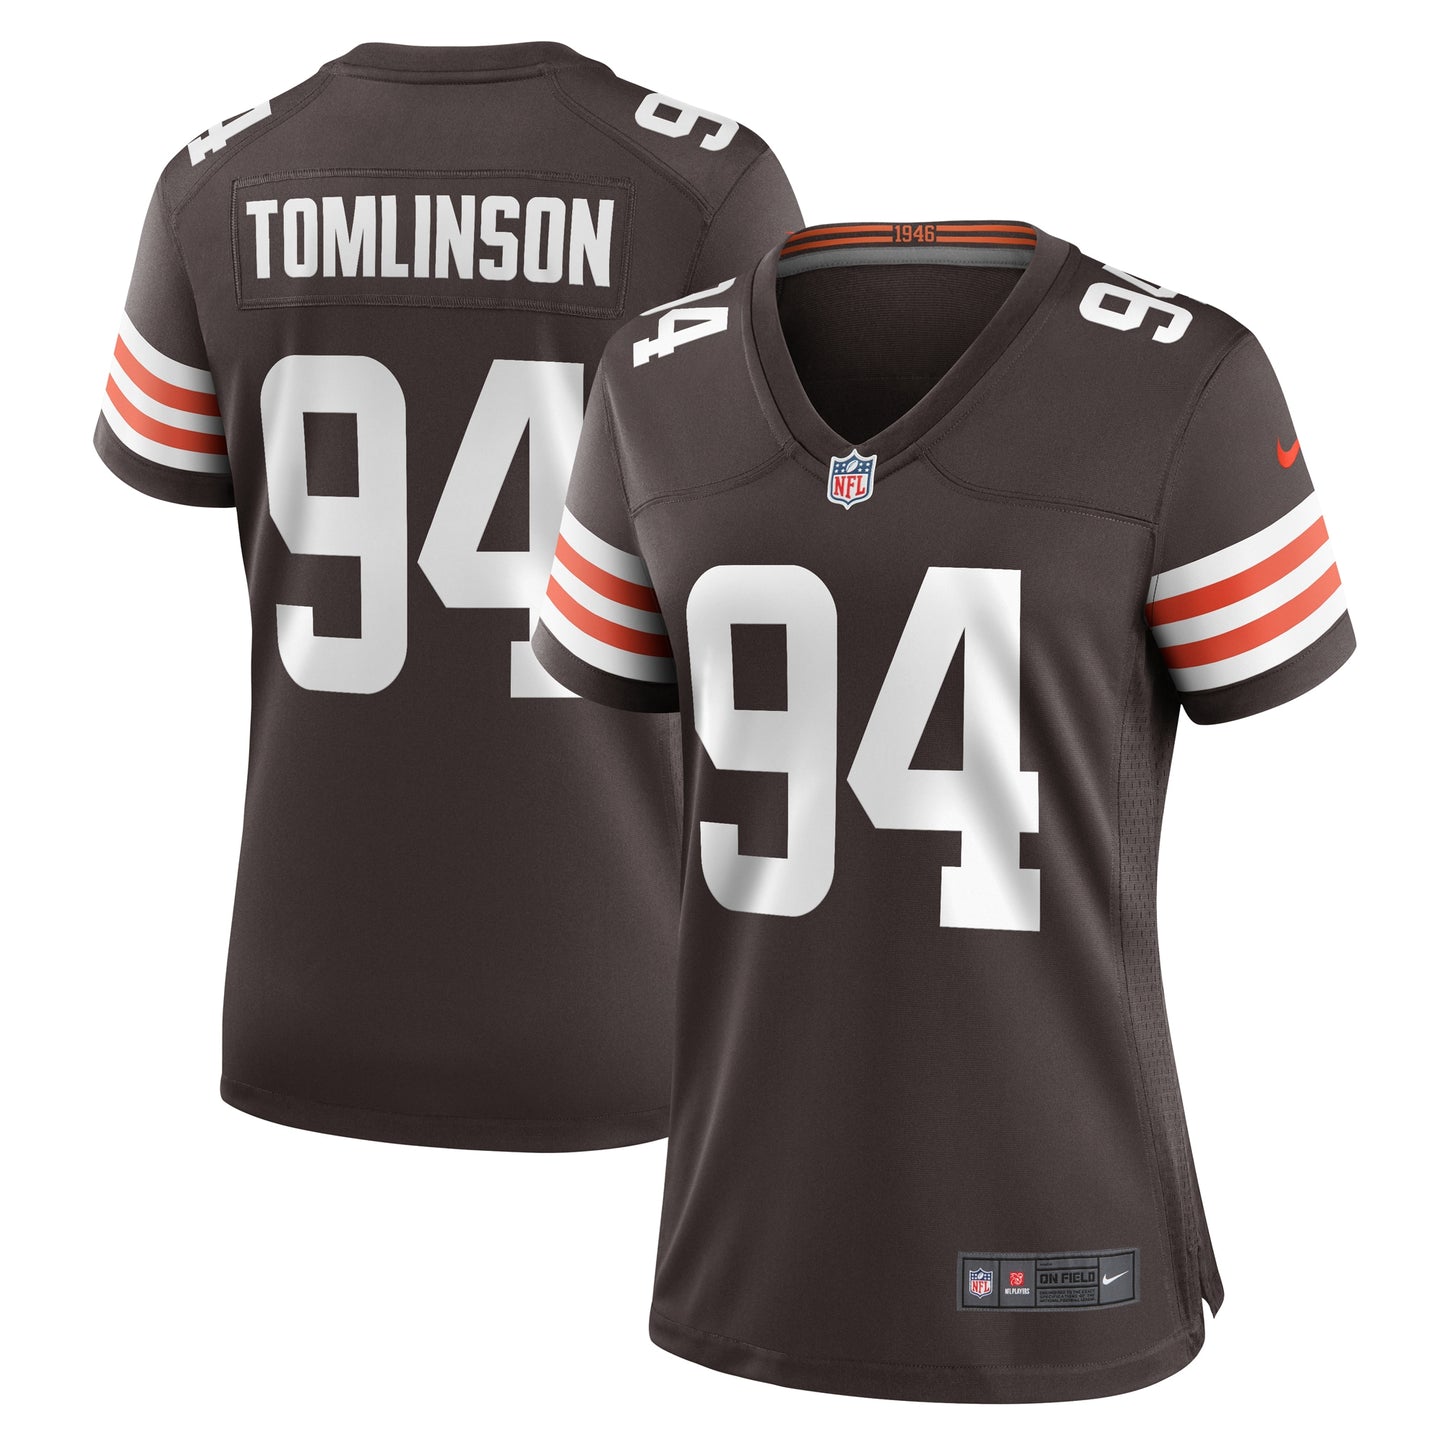 Dalvin Tomlinson Cleveland Browns Nike Women's Game Player Jersey - Brown